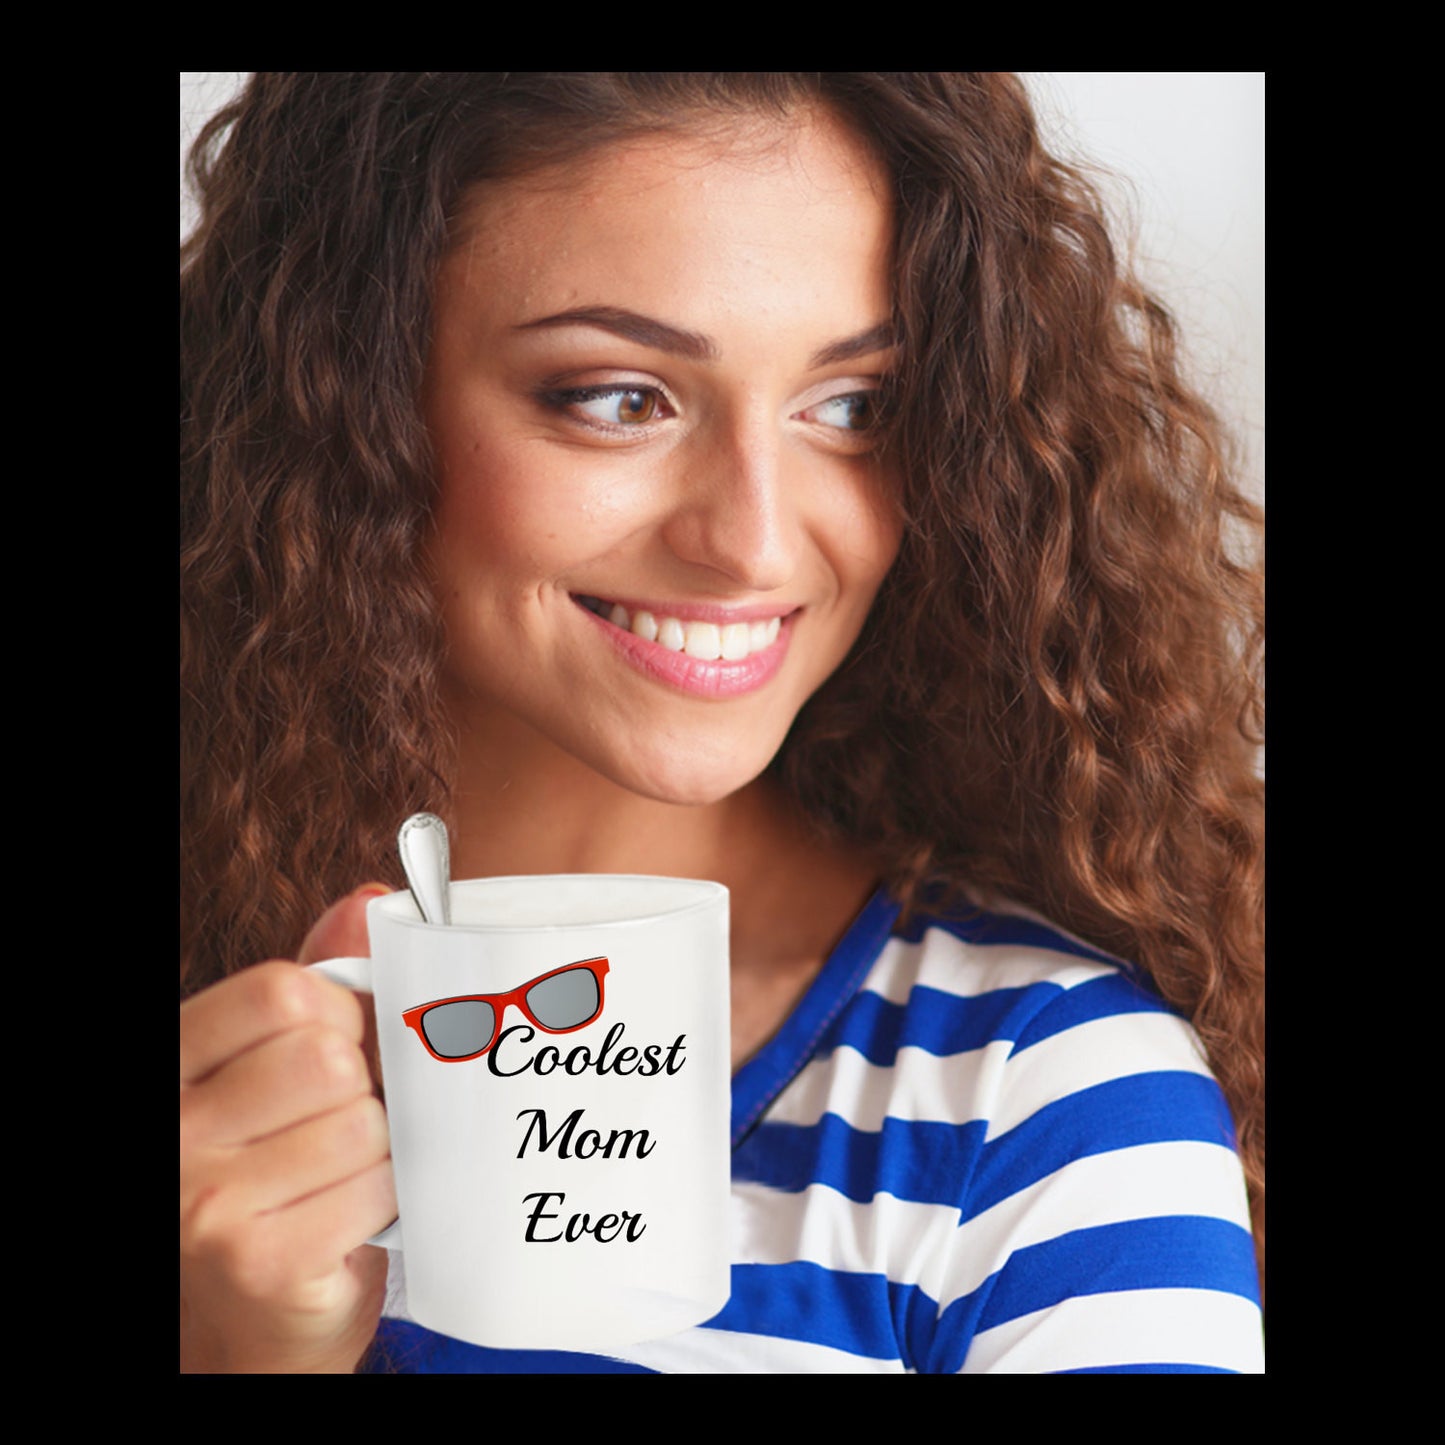 Fun Mom Gift -Coolest Mom Ever -Novelty Coffee Cup Gift Birthday or Anytime Ceramic